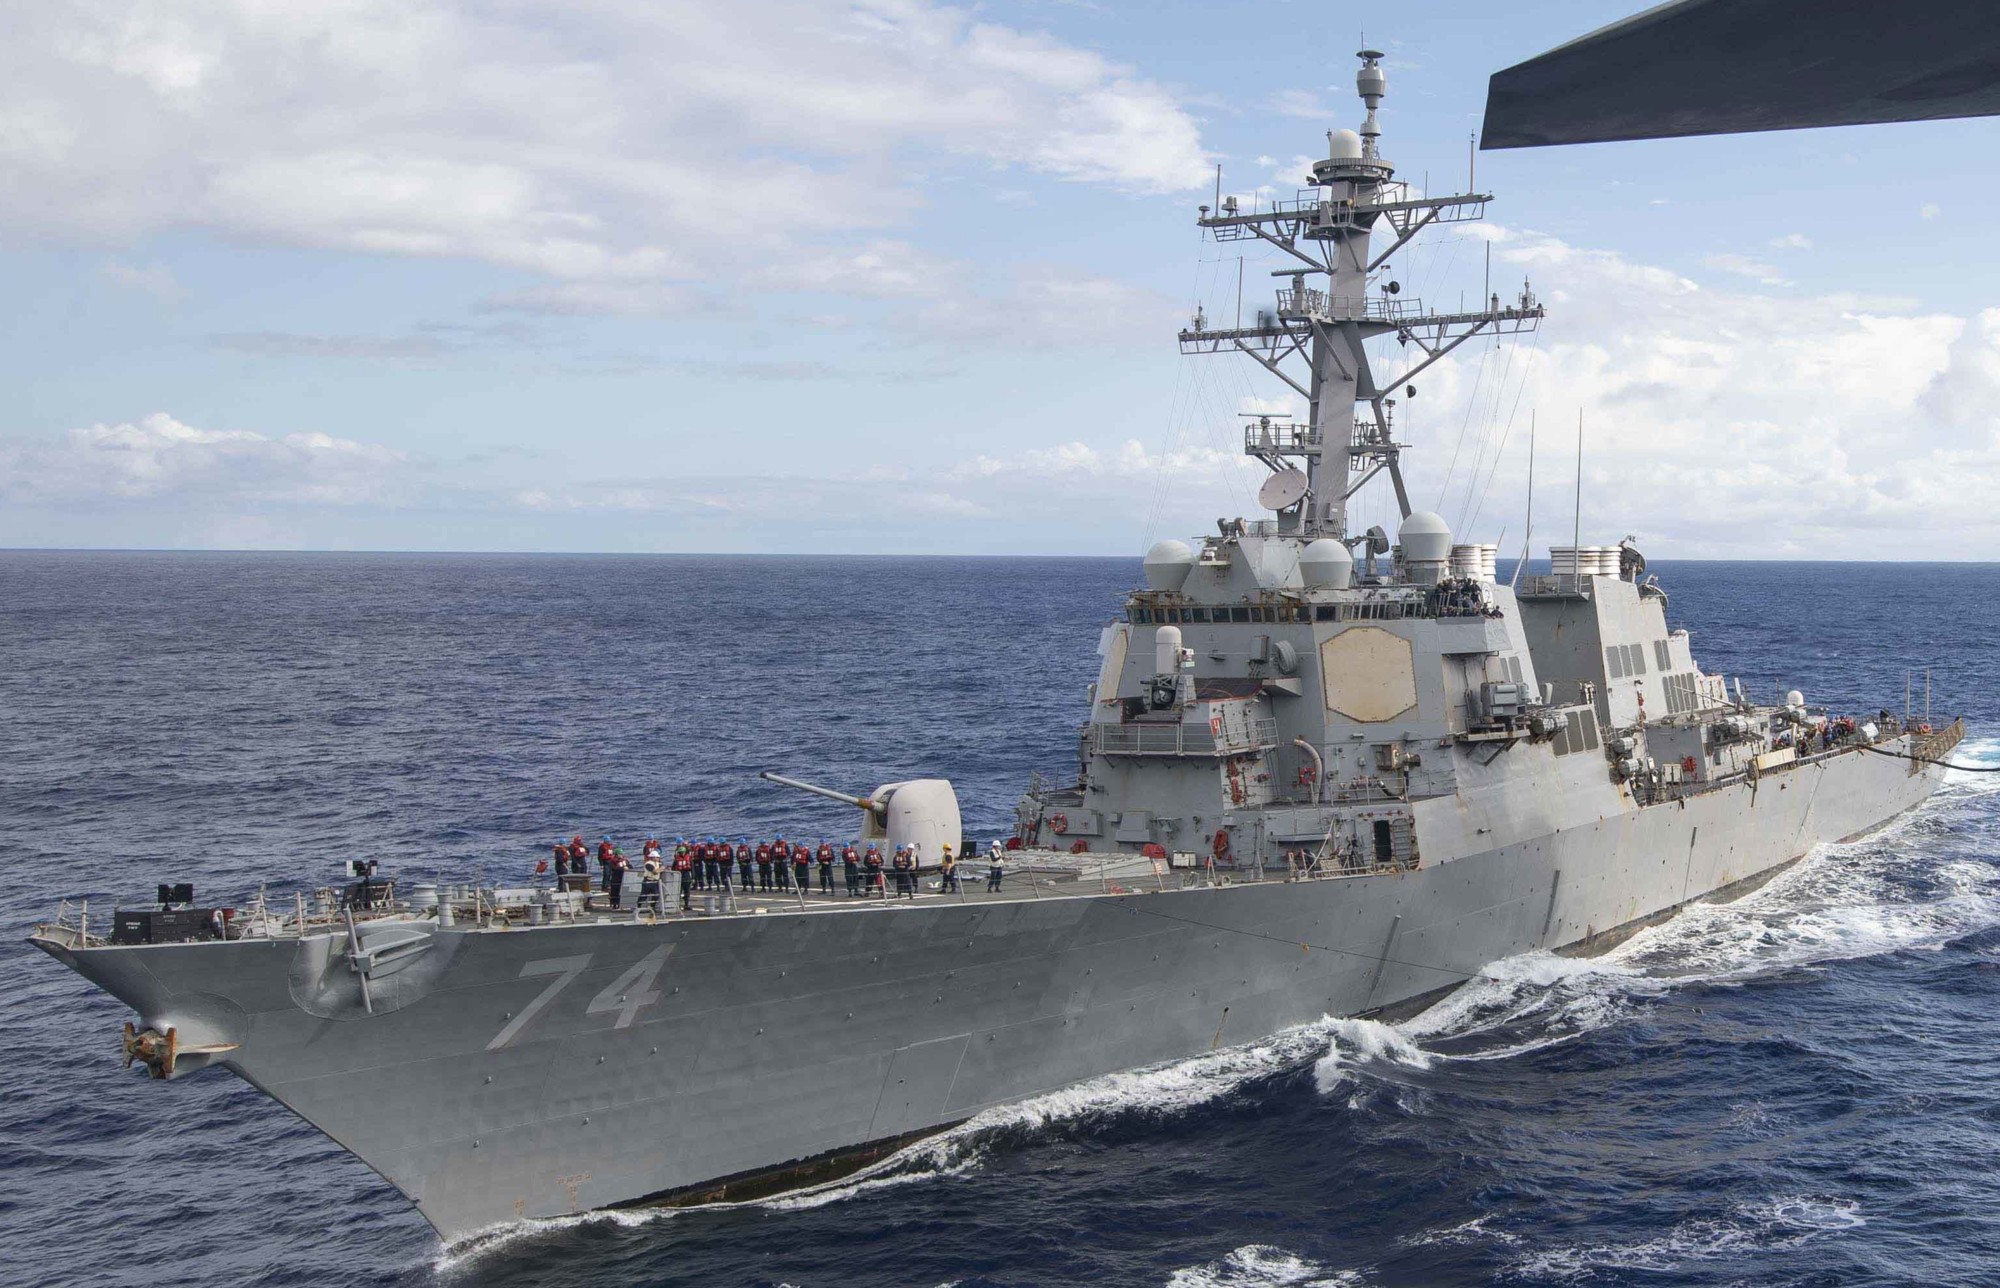 ddg-74 uss mcfaul guided missile destroyer arleigh burke class aegis us navy 71